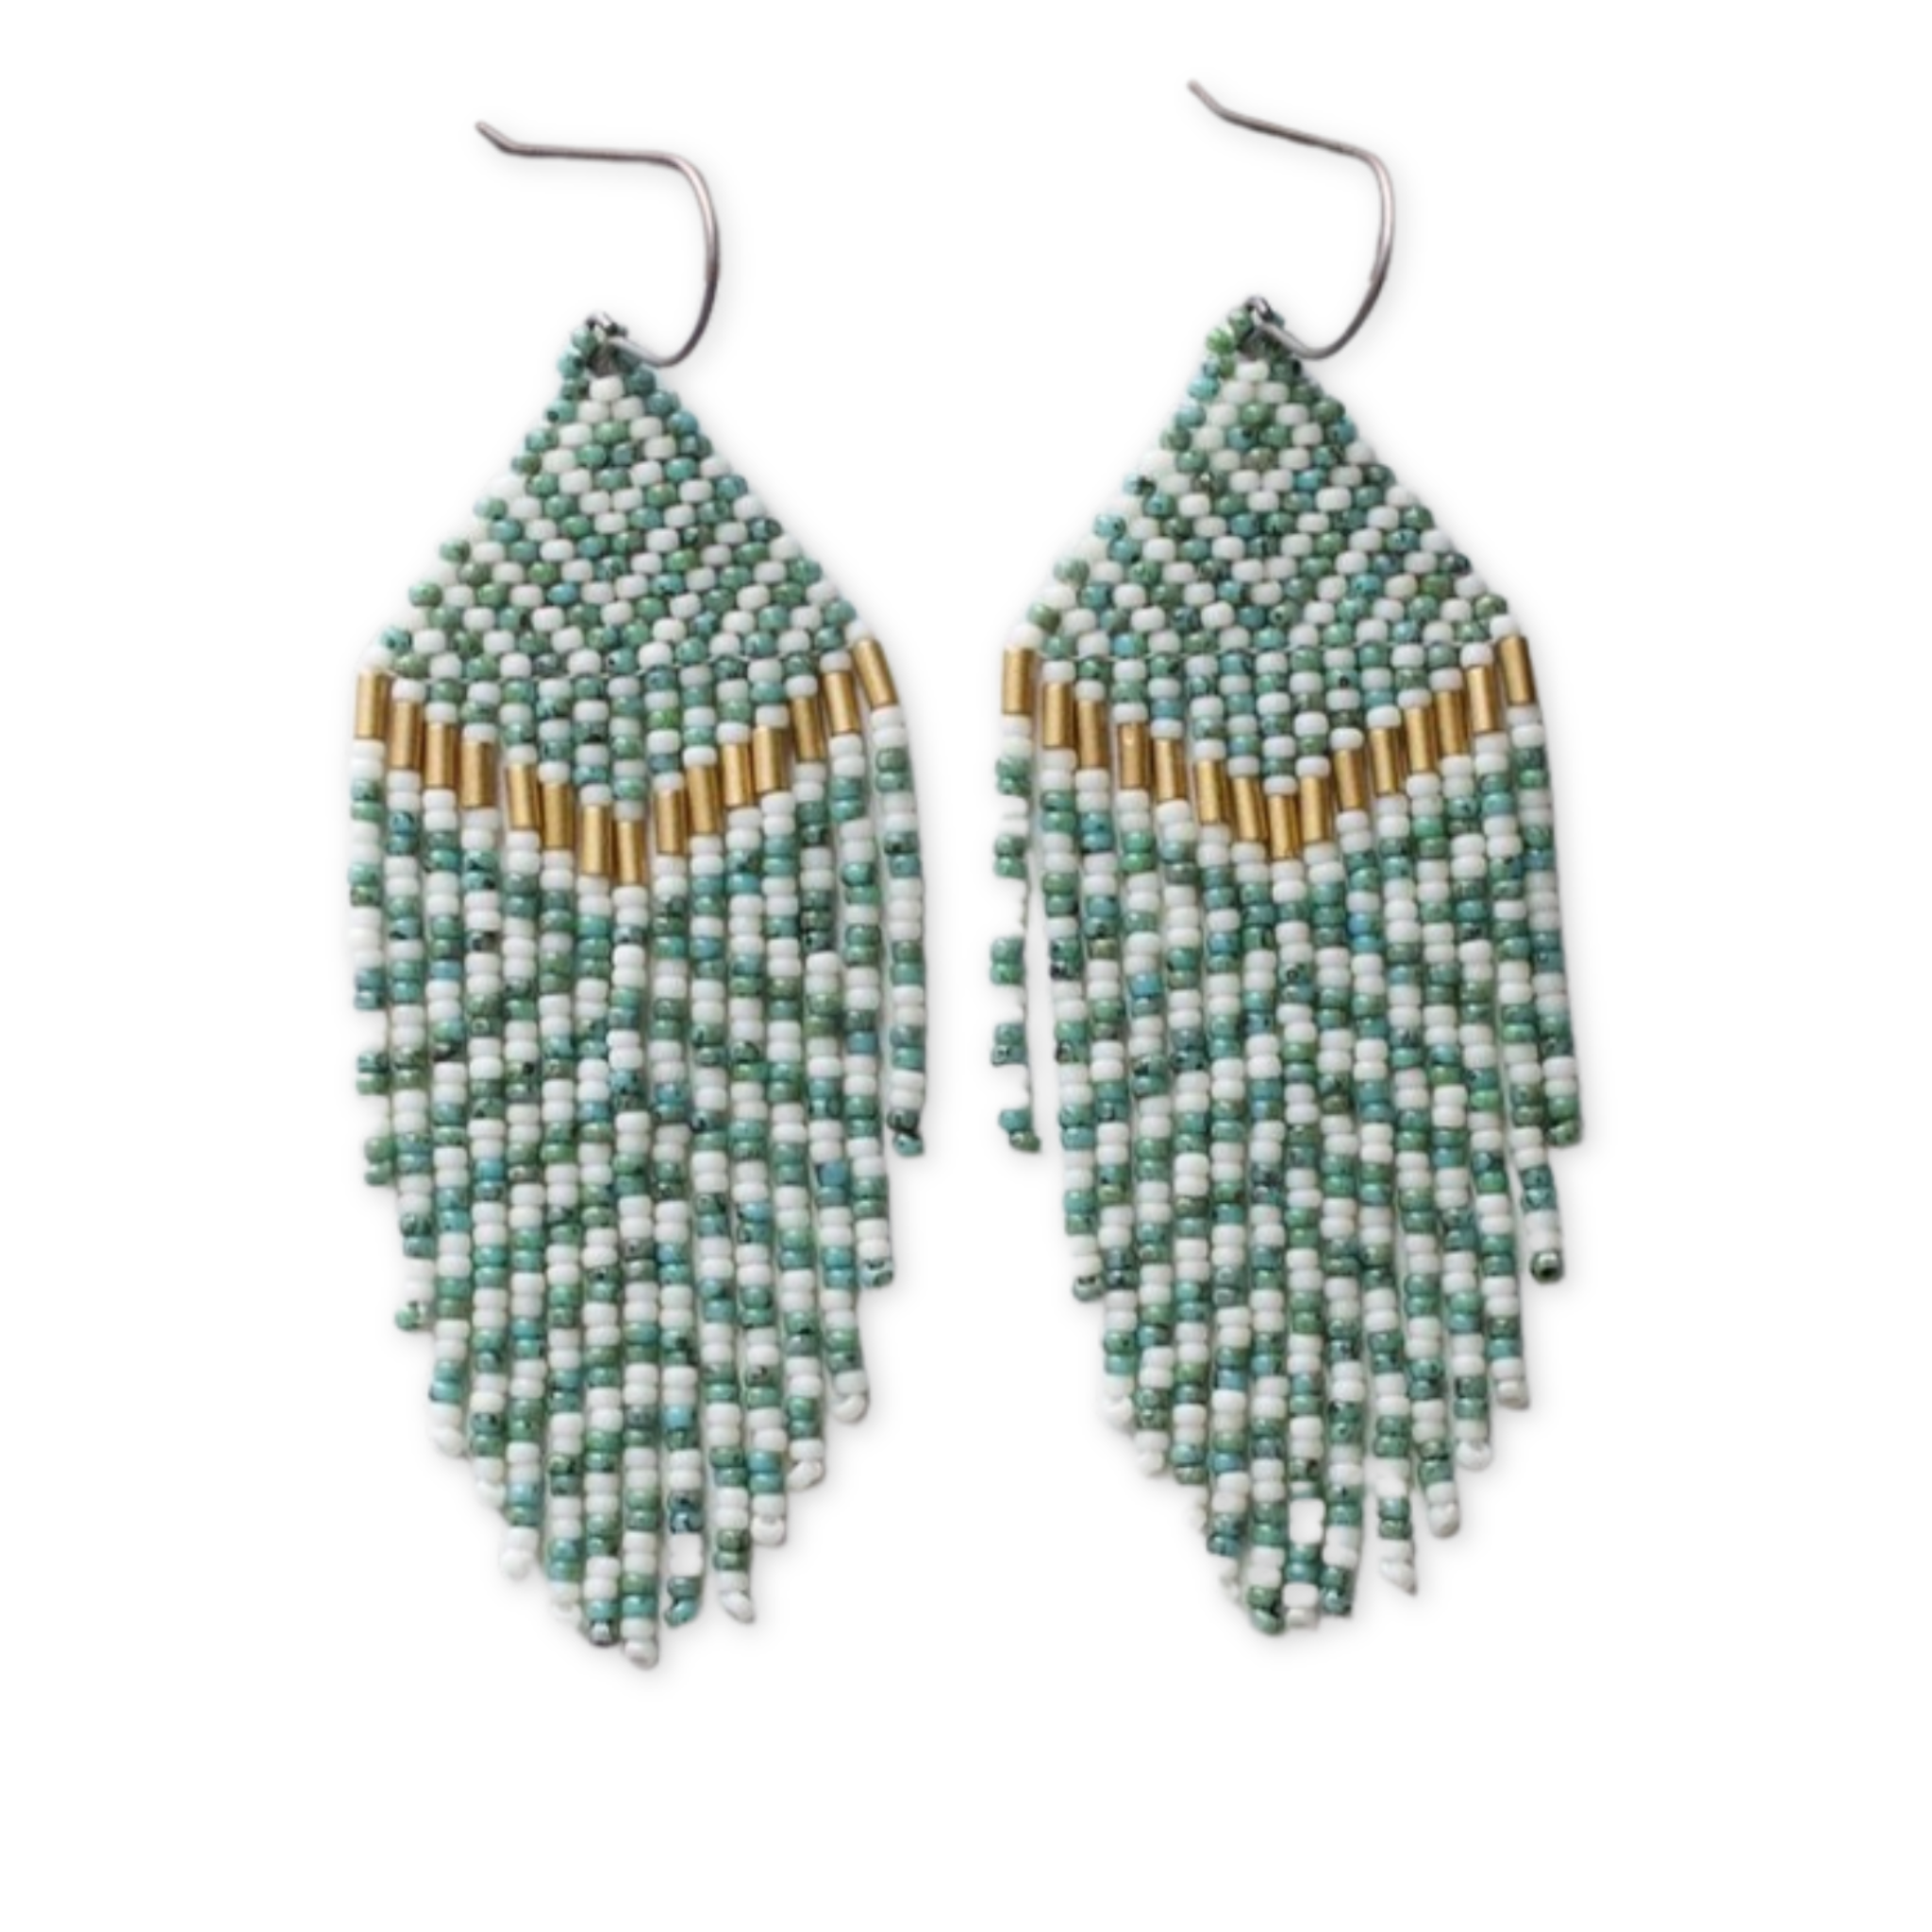 teal and white hand beaded earrings with gold chevron design